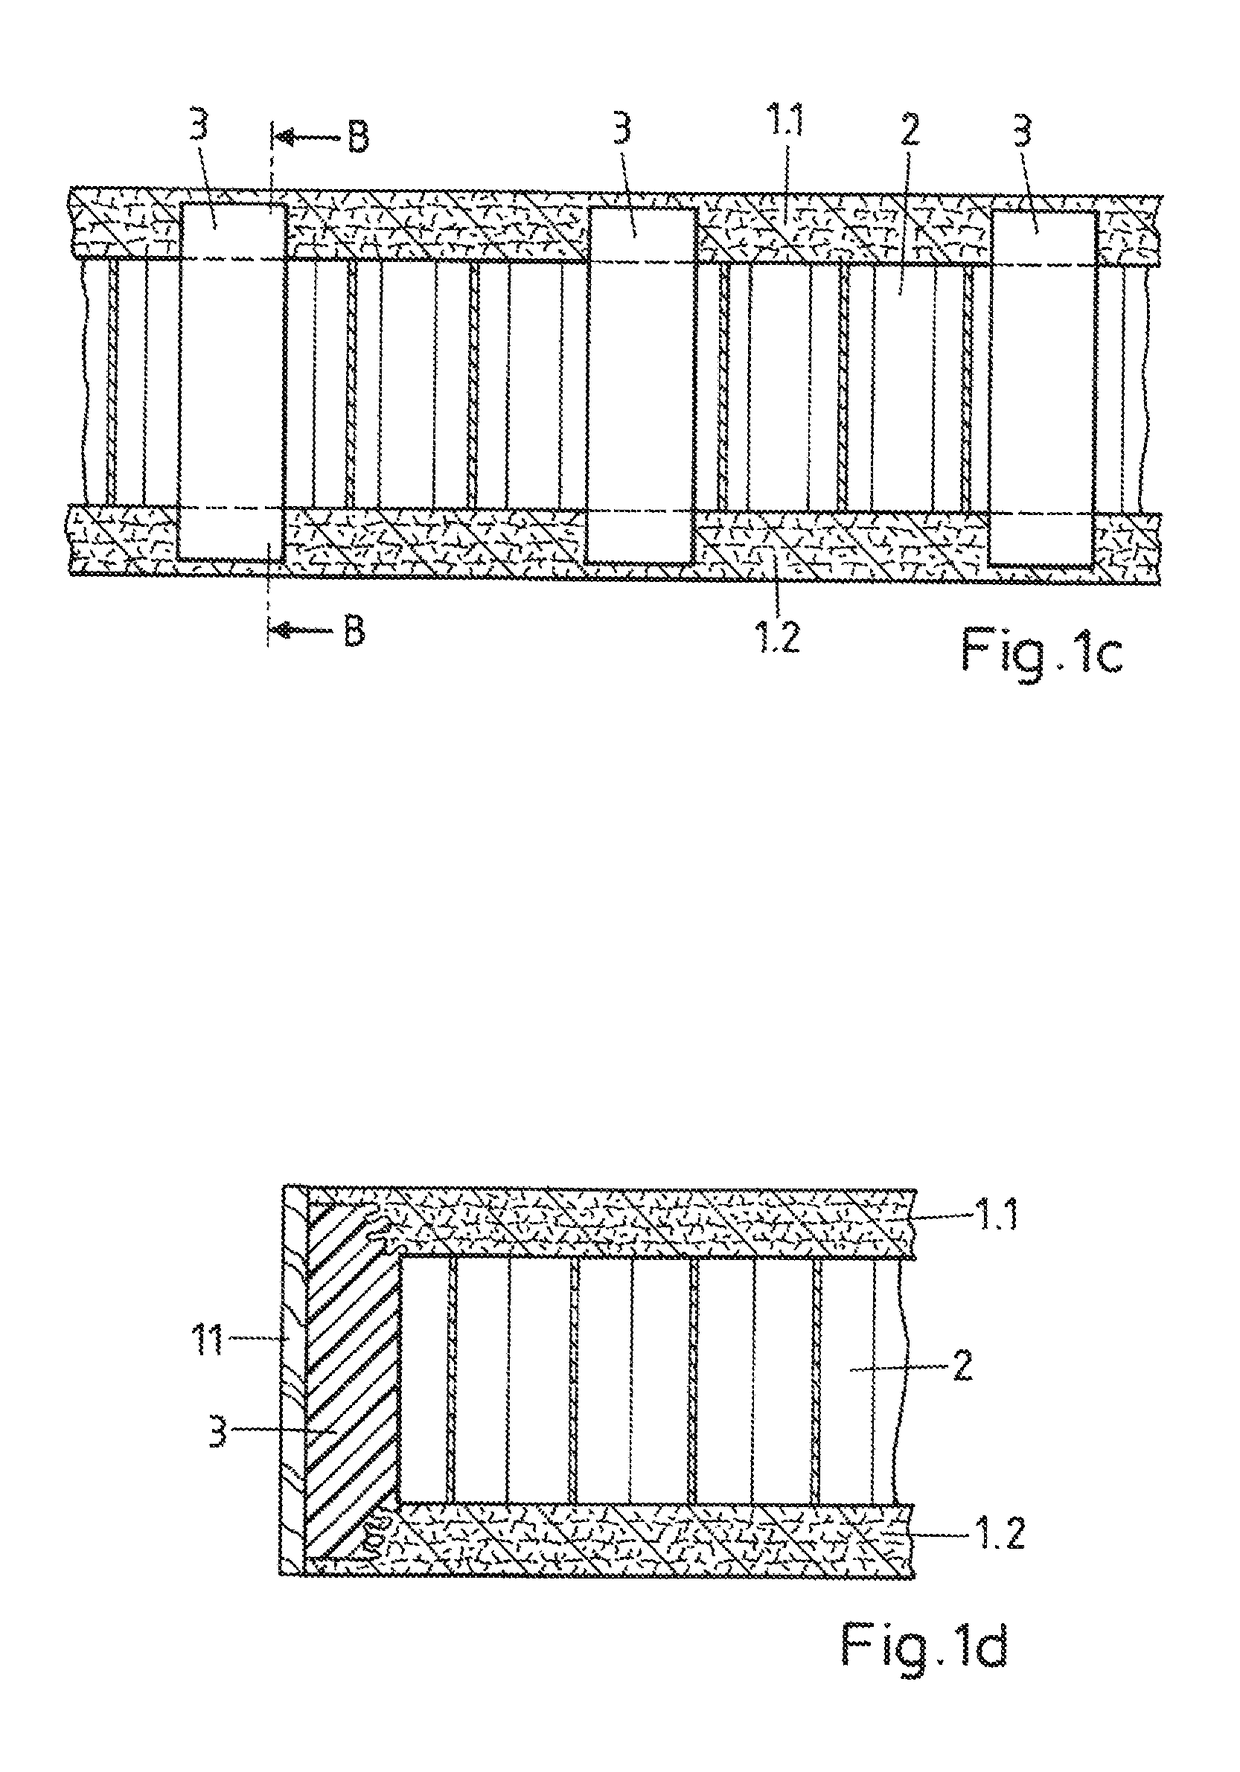 Method of fastening an edge structure to a construction element